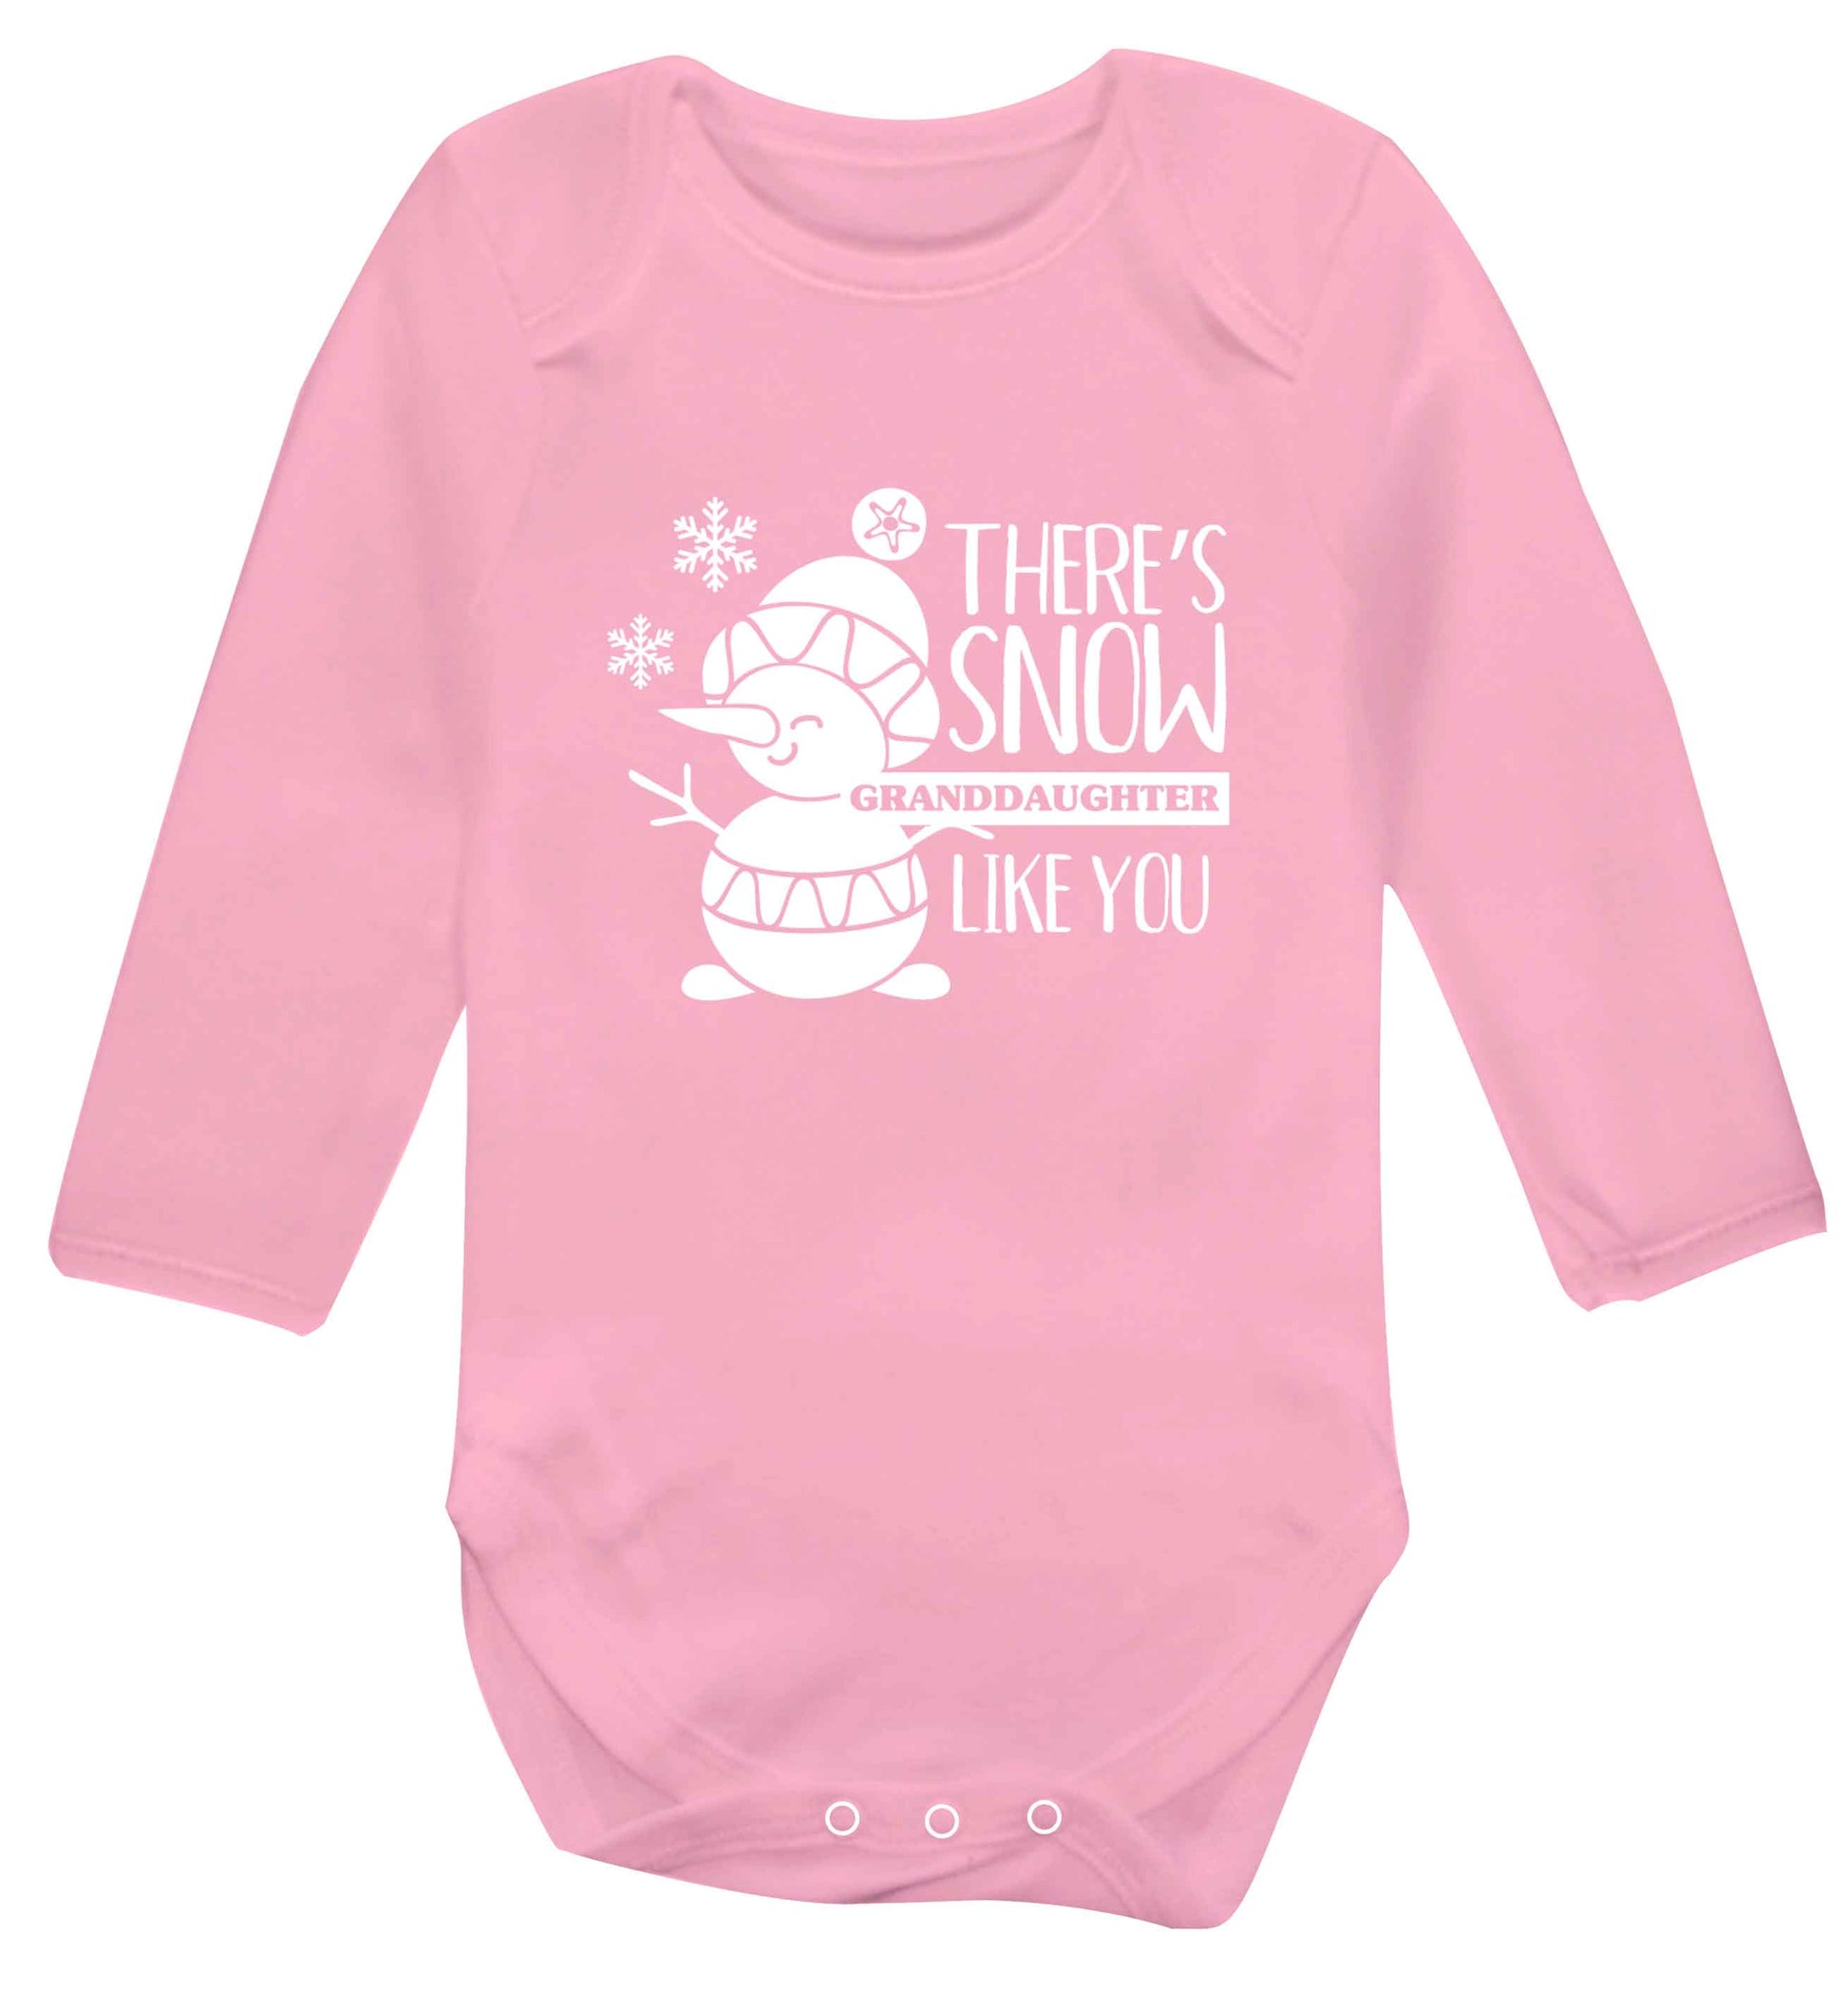 There's snow granddaughter like you baby vest long sleeved pale pink 6-12 months